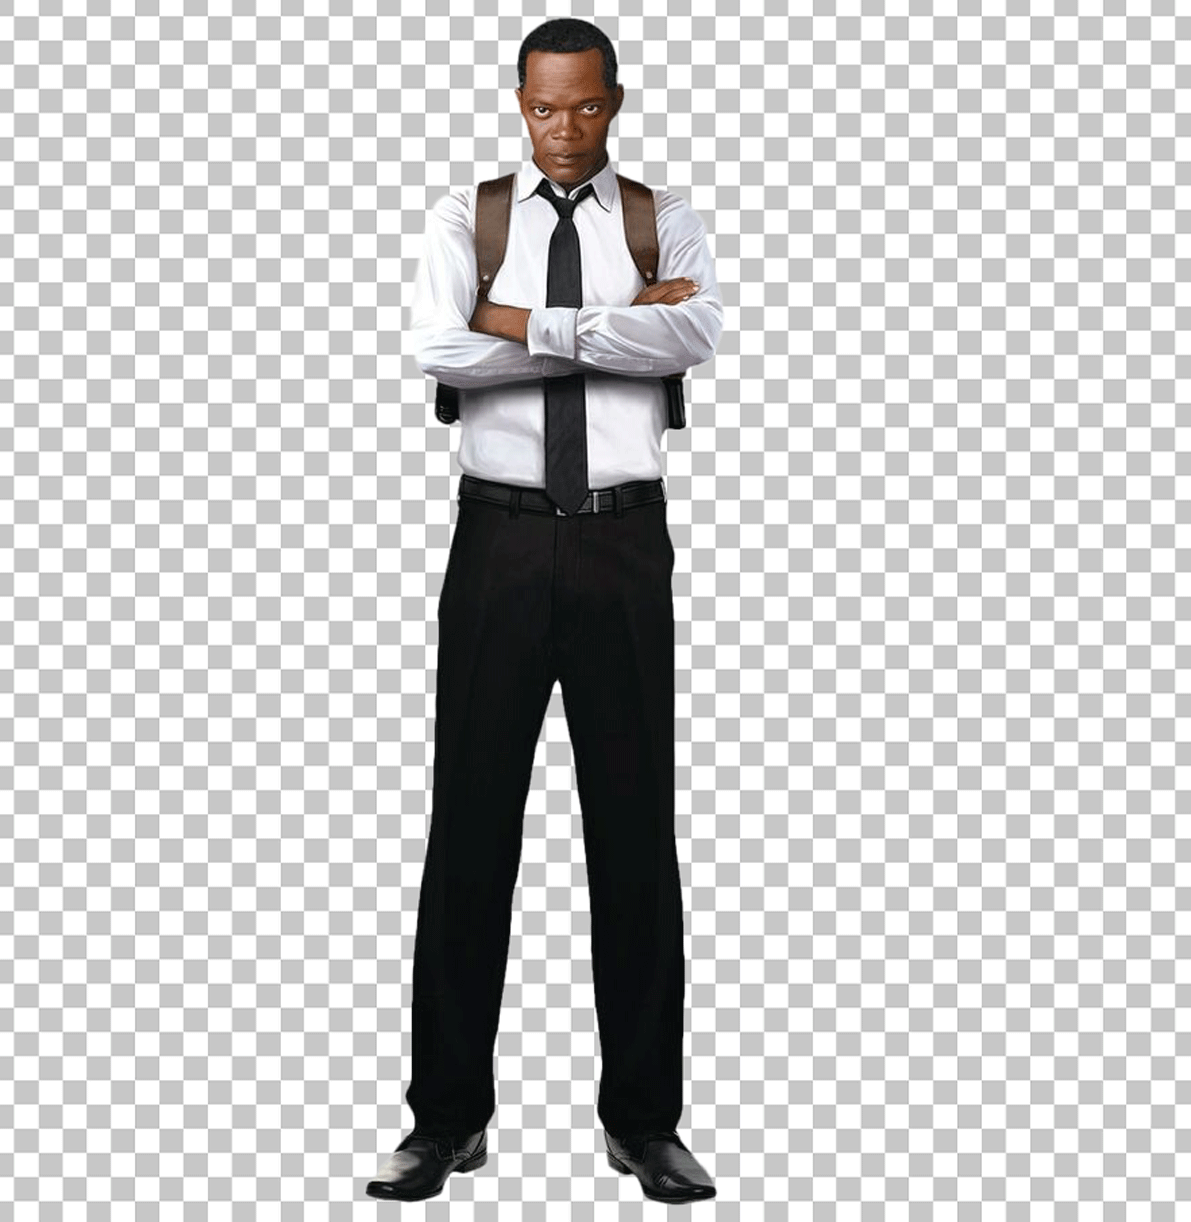 Nick fury standing and wearing a white shirt PNG Image